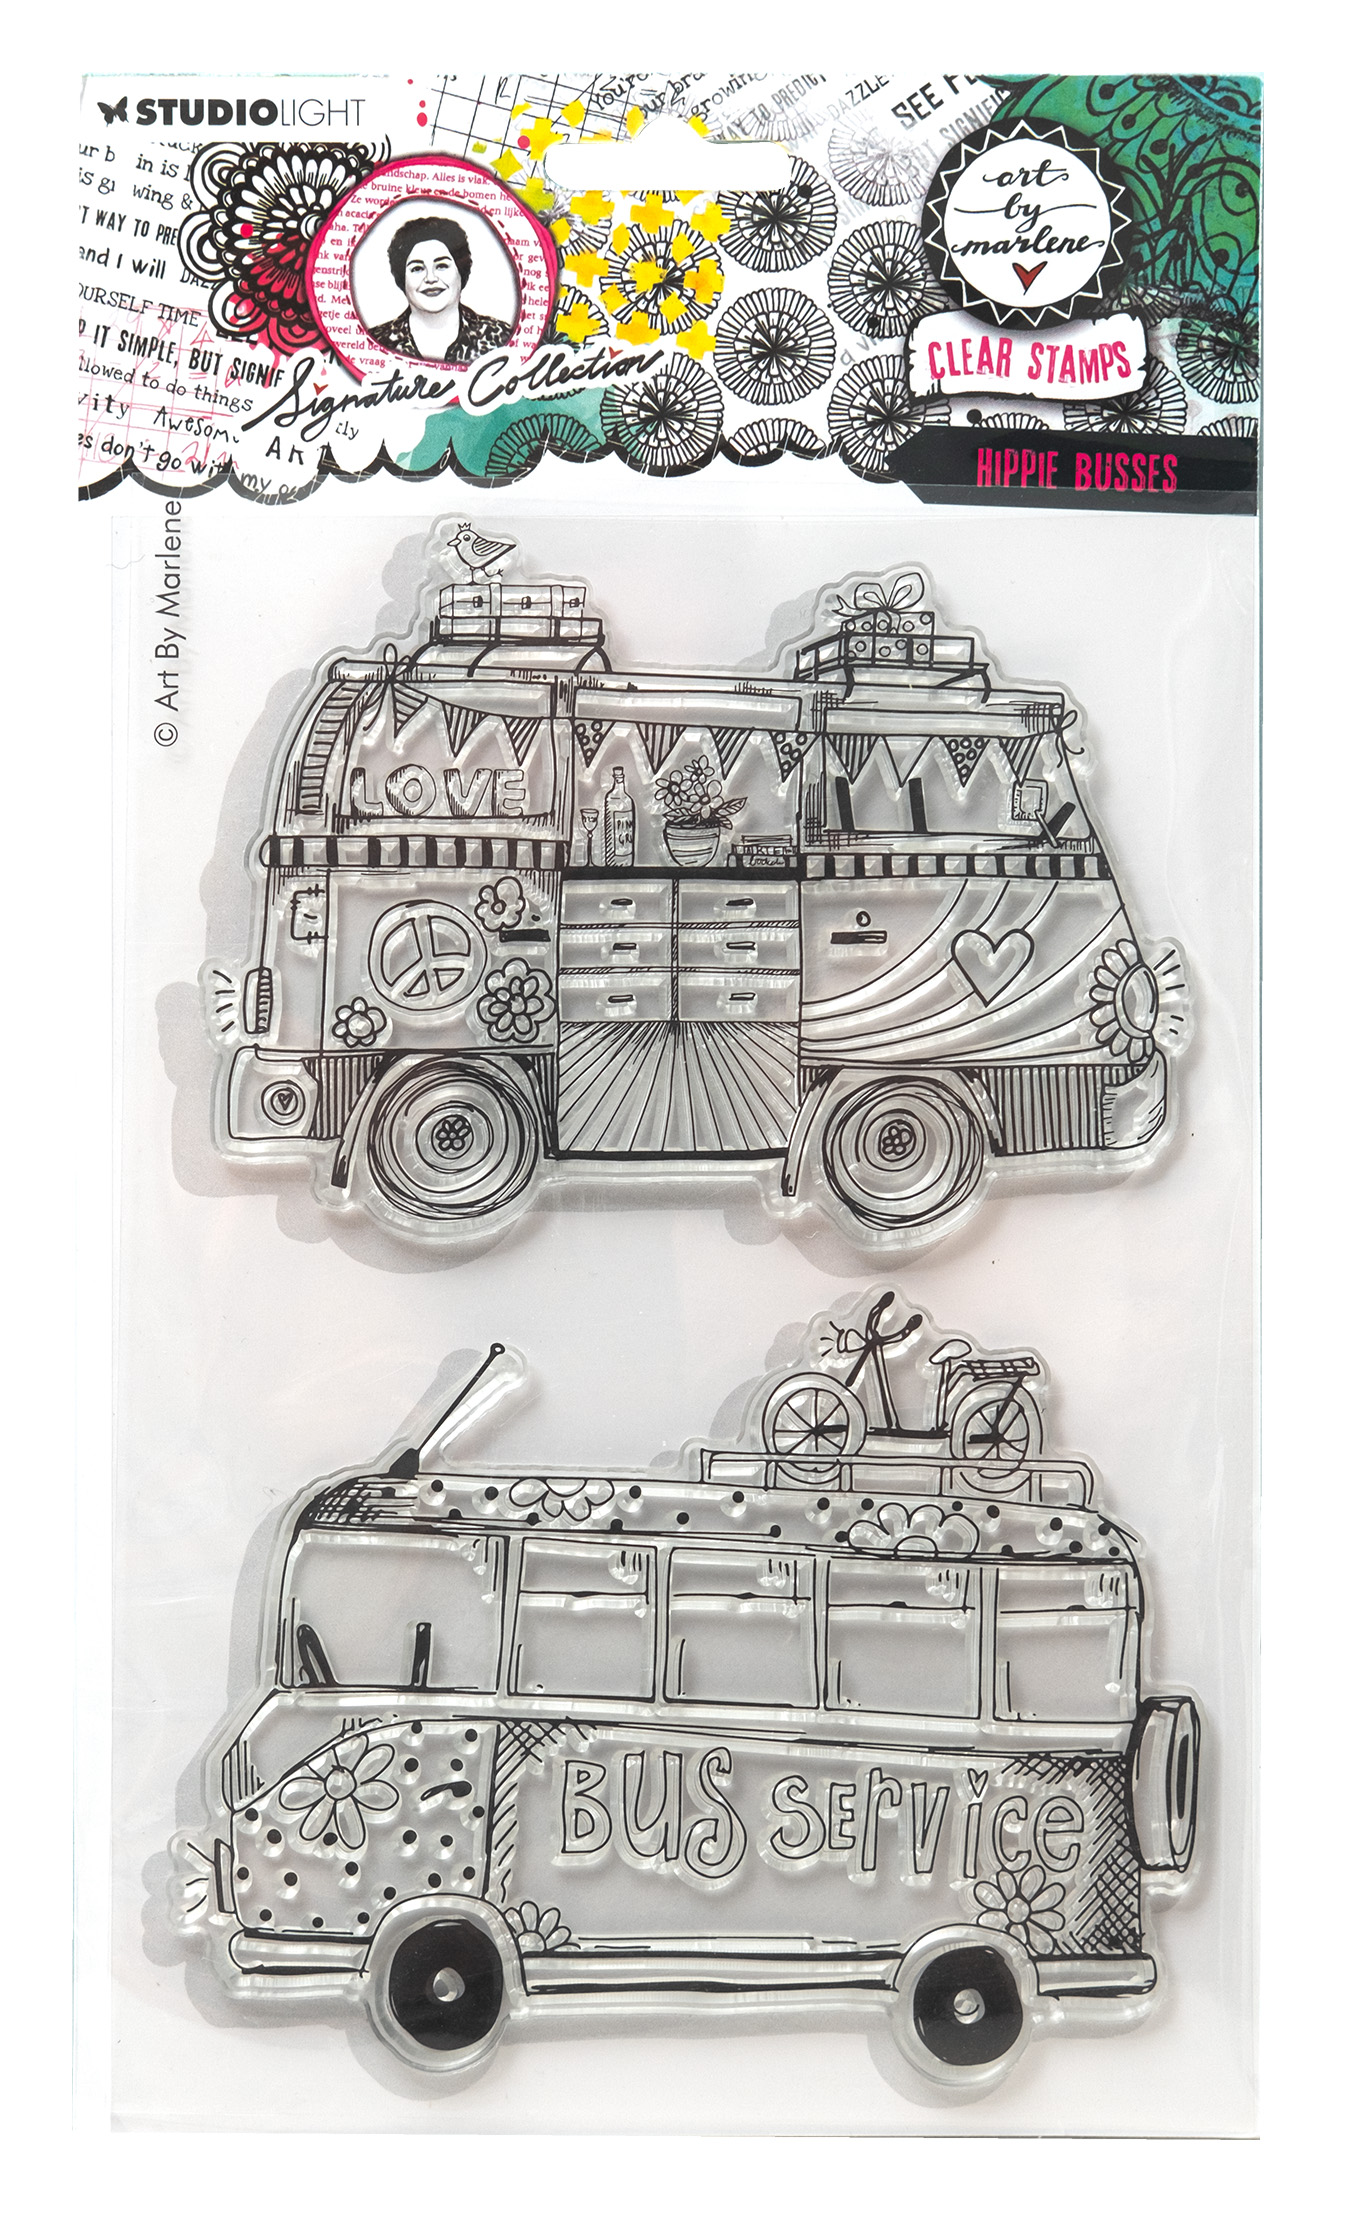 ABM-SI-STAMP700 - Art by Marlene - Hippie busses Signature Collection nr.700